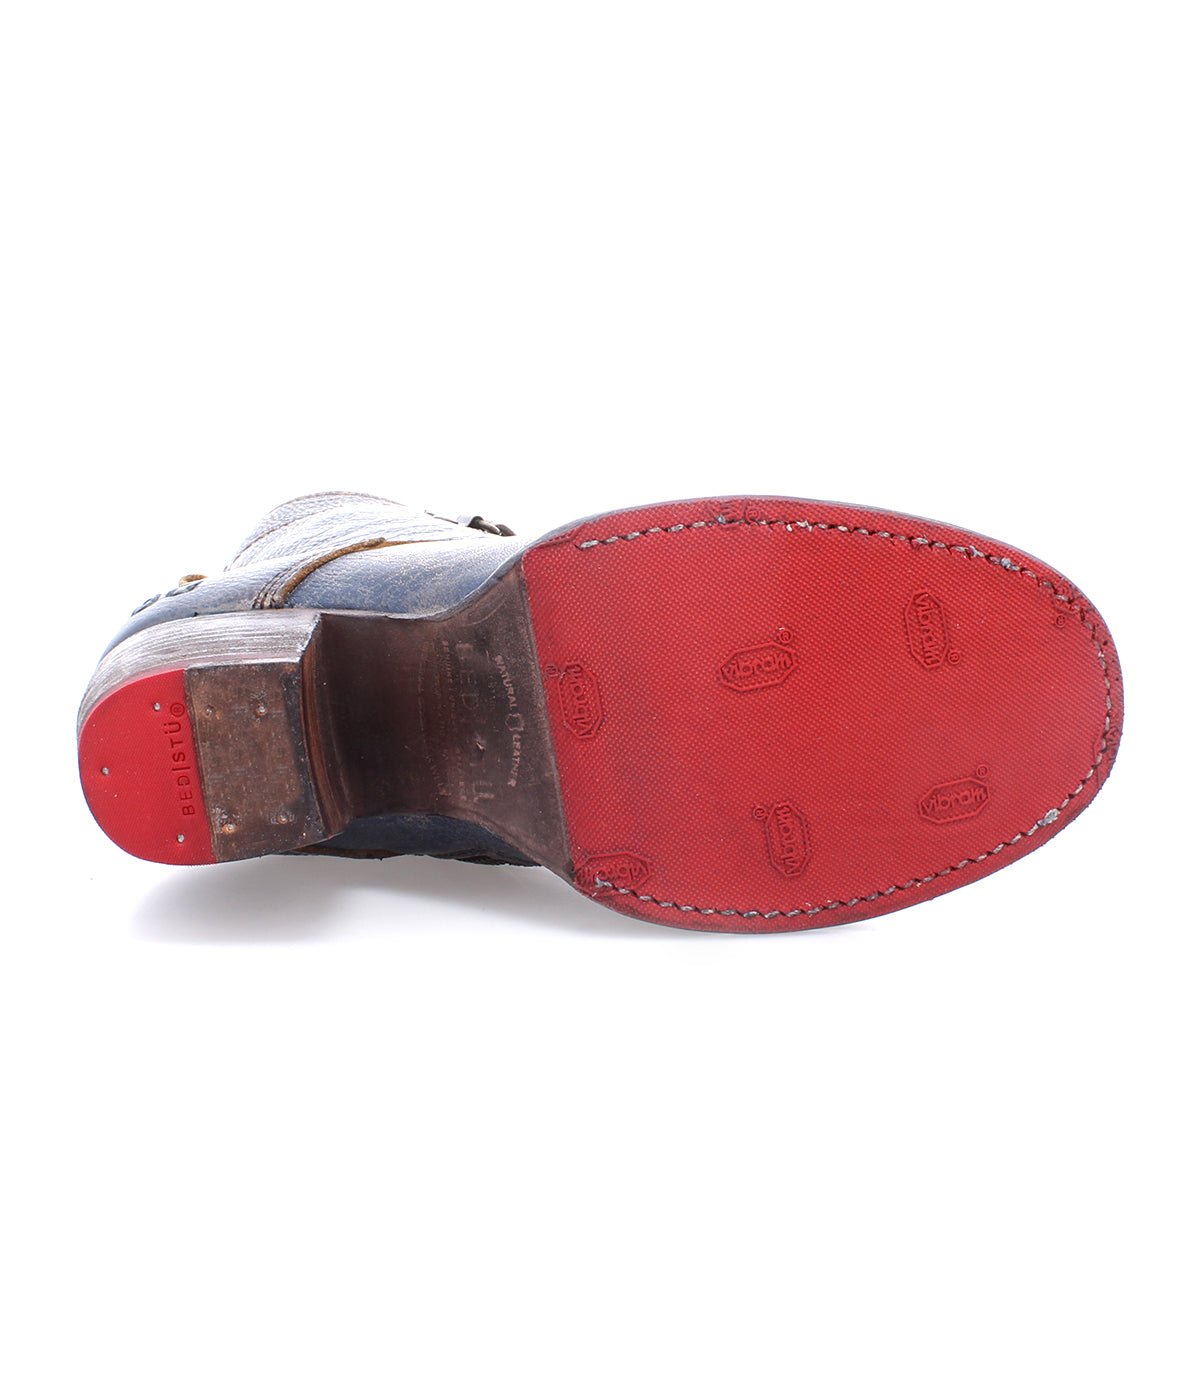 A pair of Bed Stu shoes with red soles on a white background.